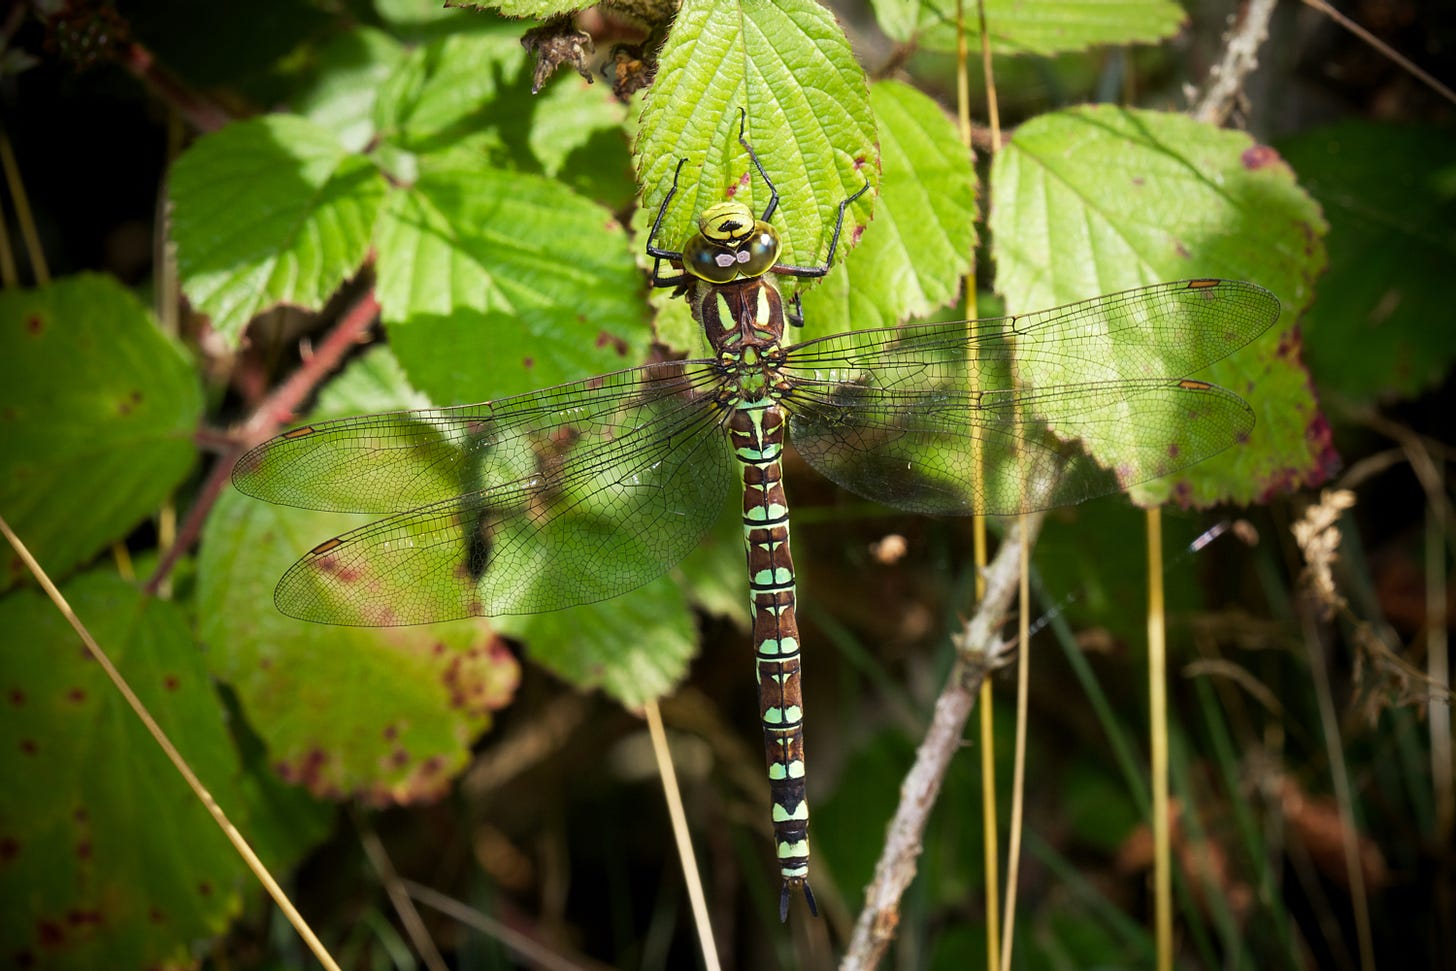 Hawker Dragonfly, photo by Jerome Whittingham